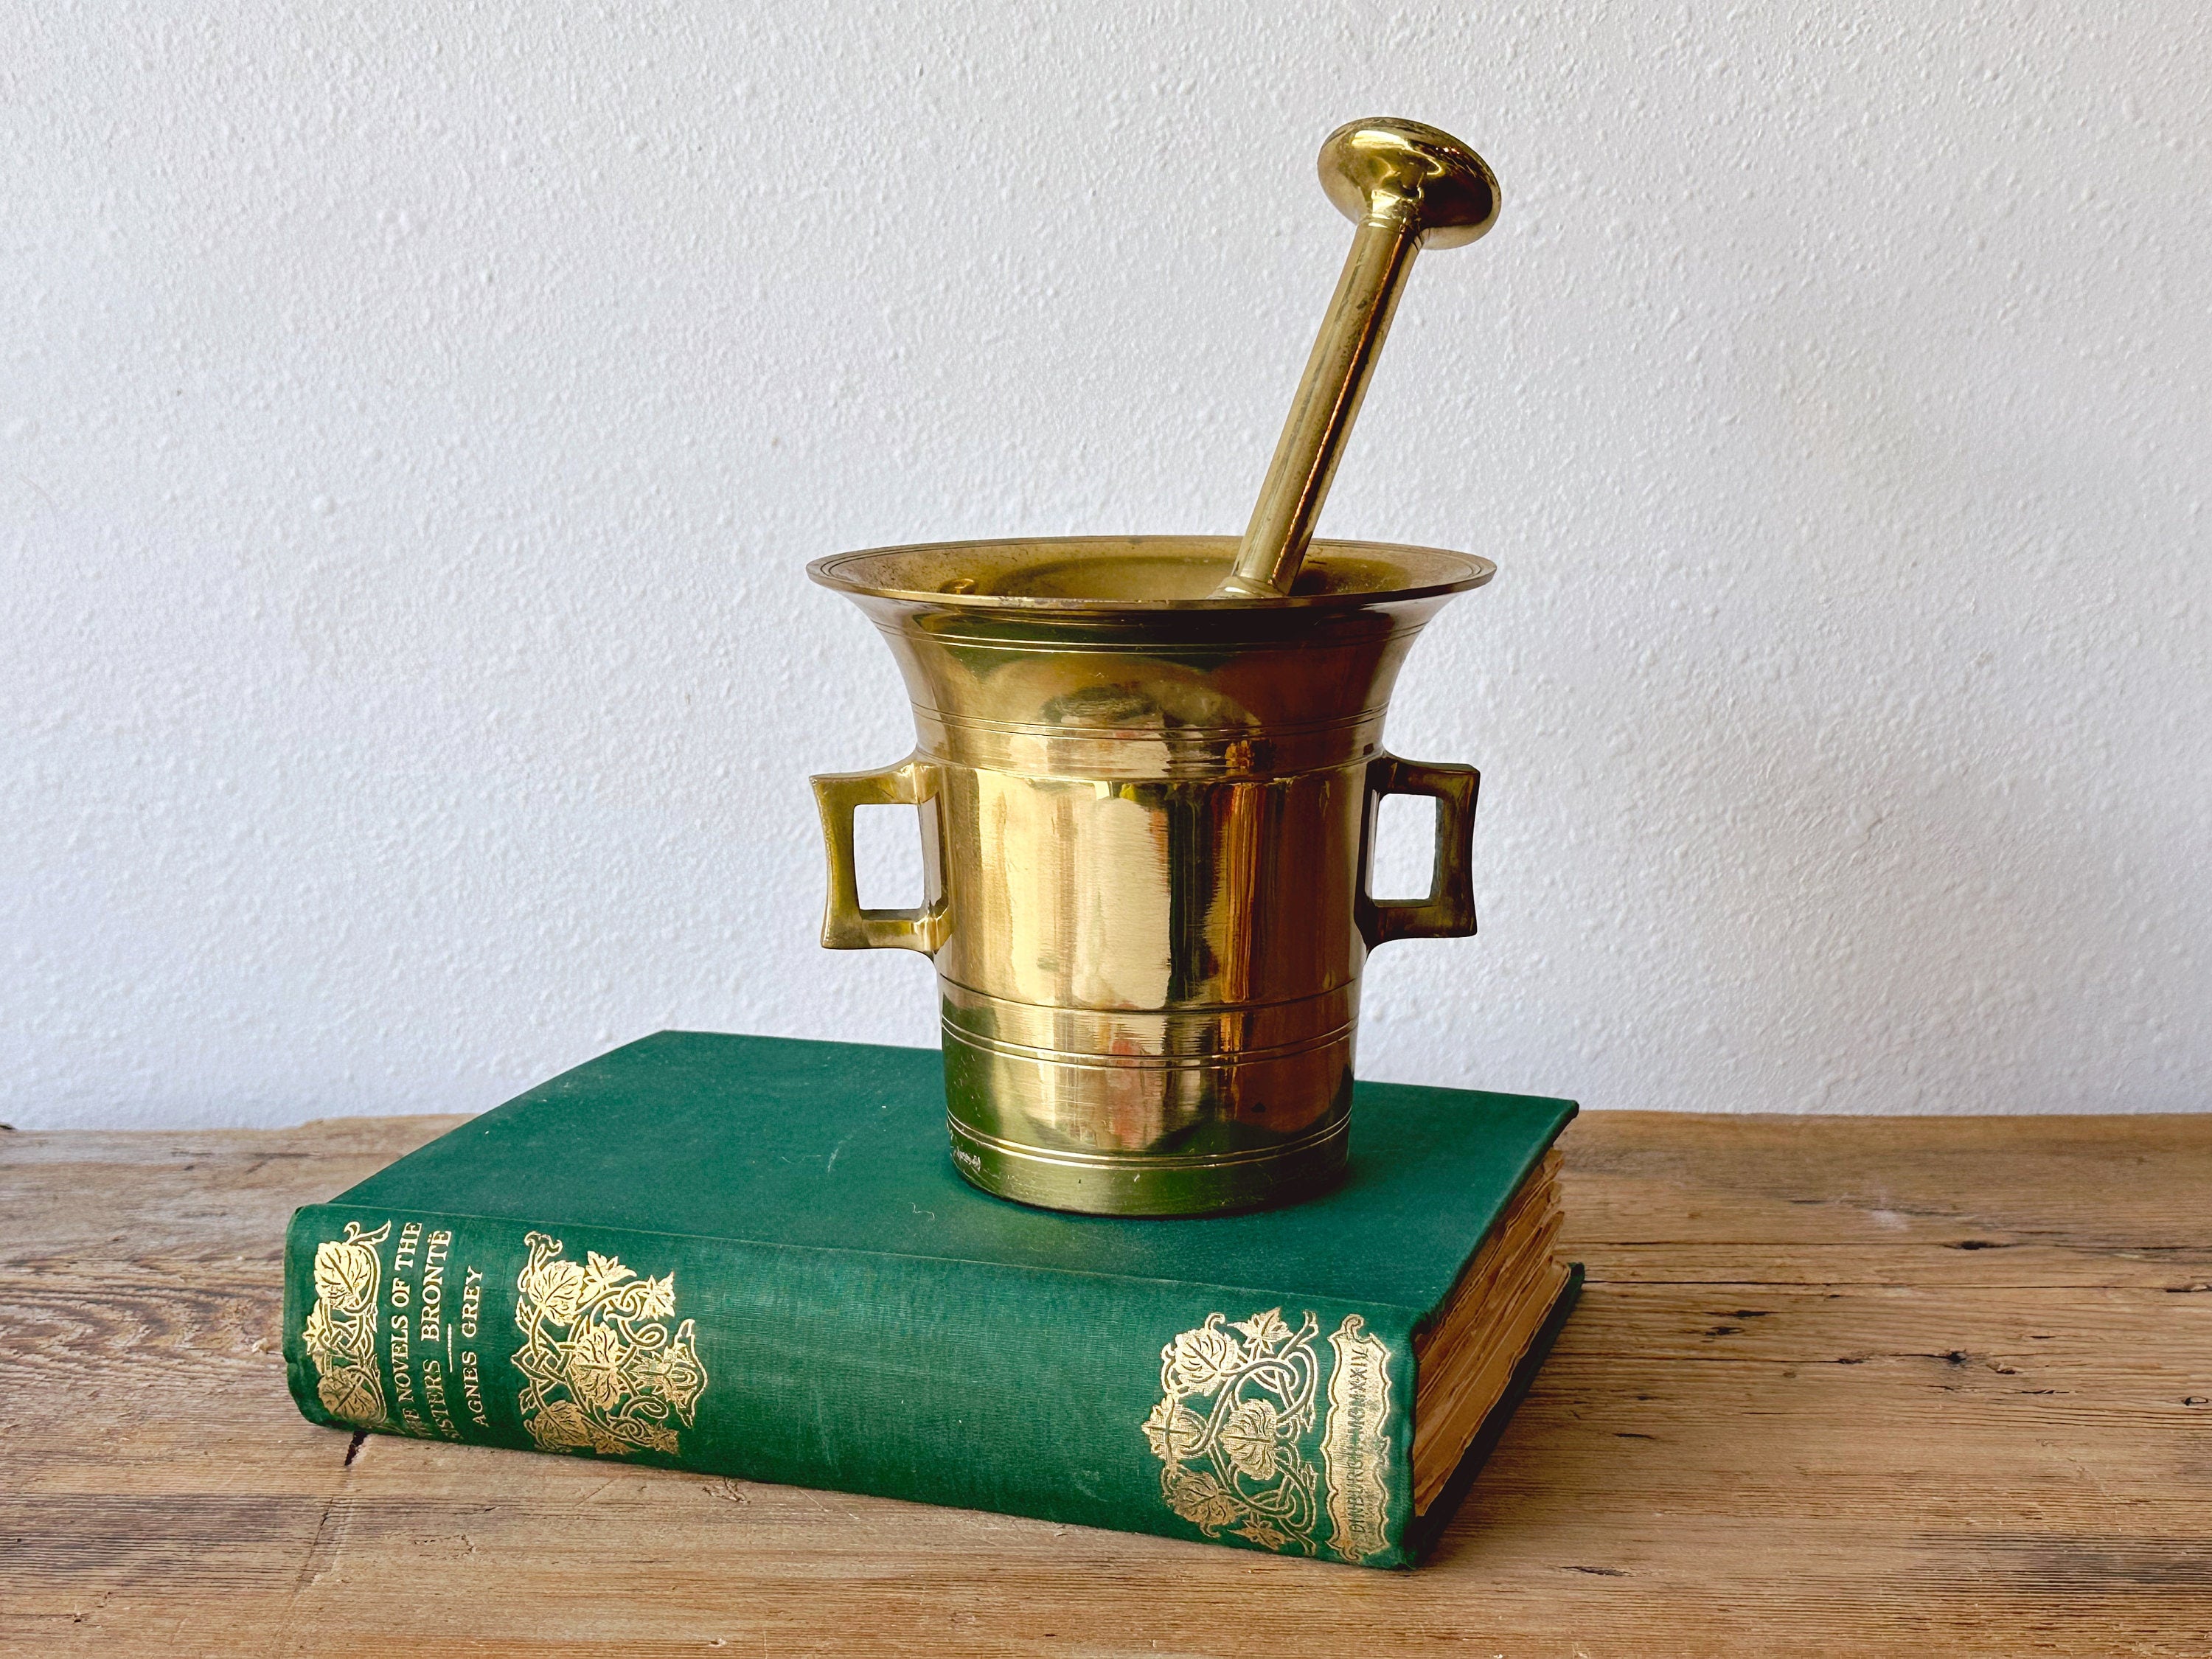 Vintage Brass Pharmacy Mortar & Pestle | Herbs, Spices, Medicine Grinder | Antique Apothecary Kitchen Decor | Gift for the Cook Housewarming